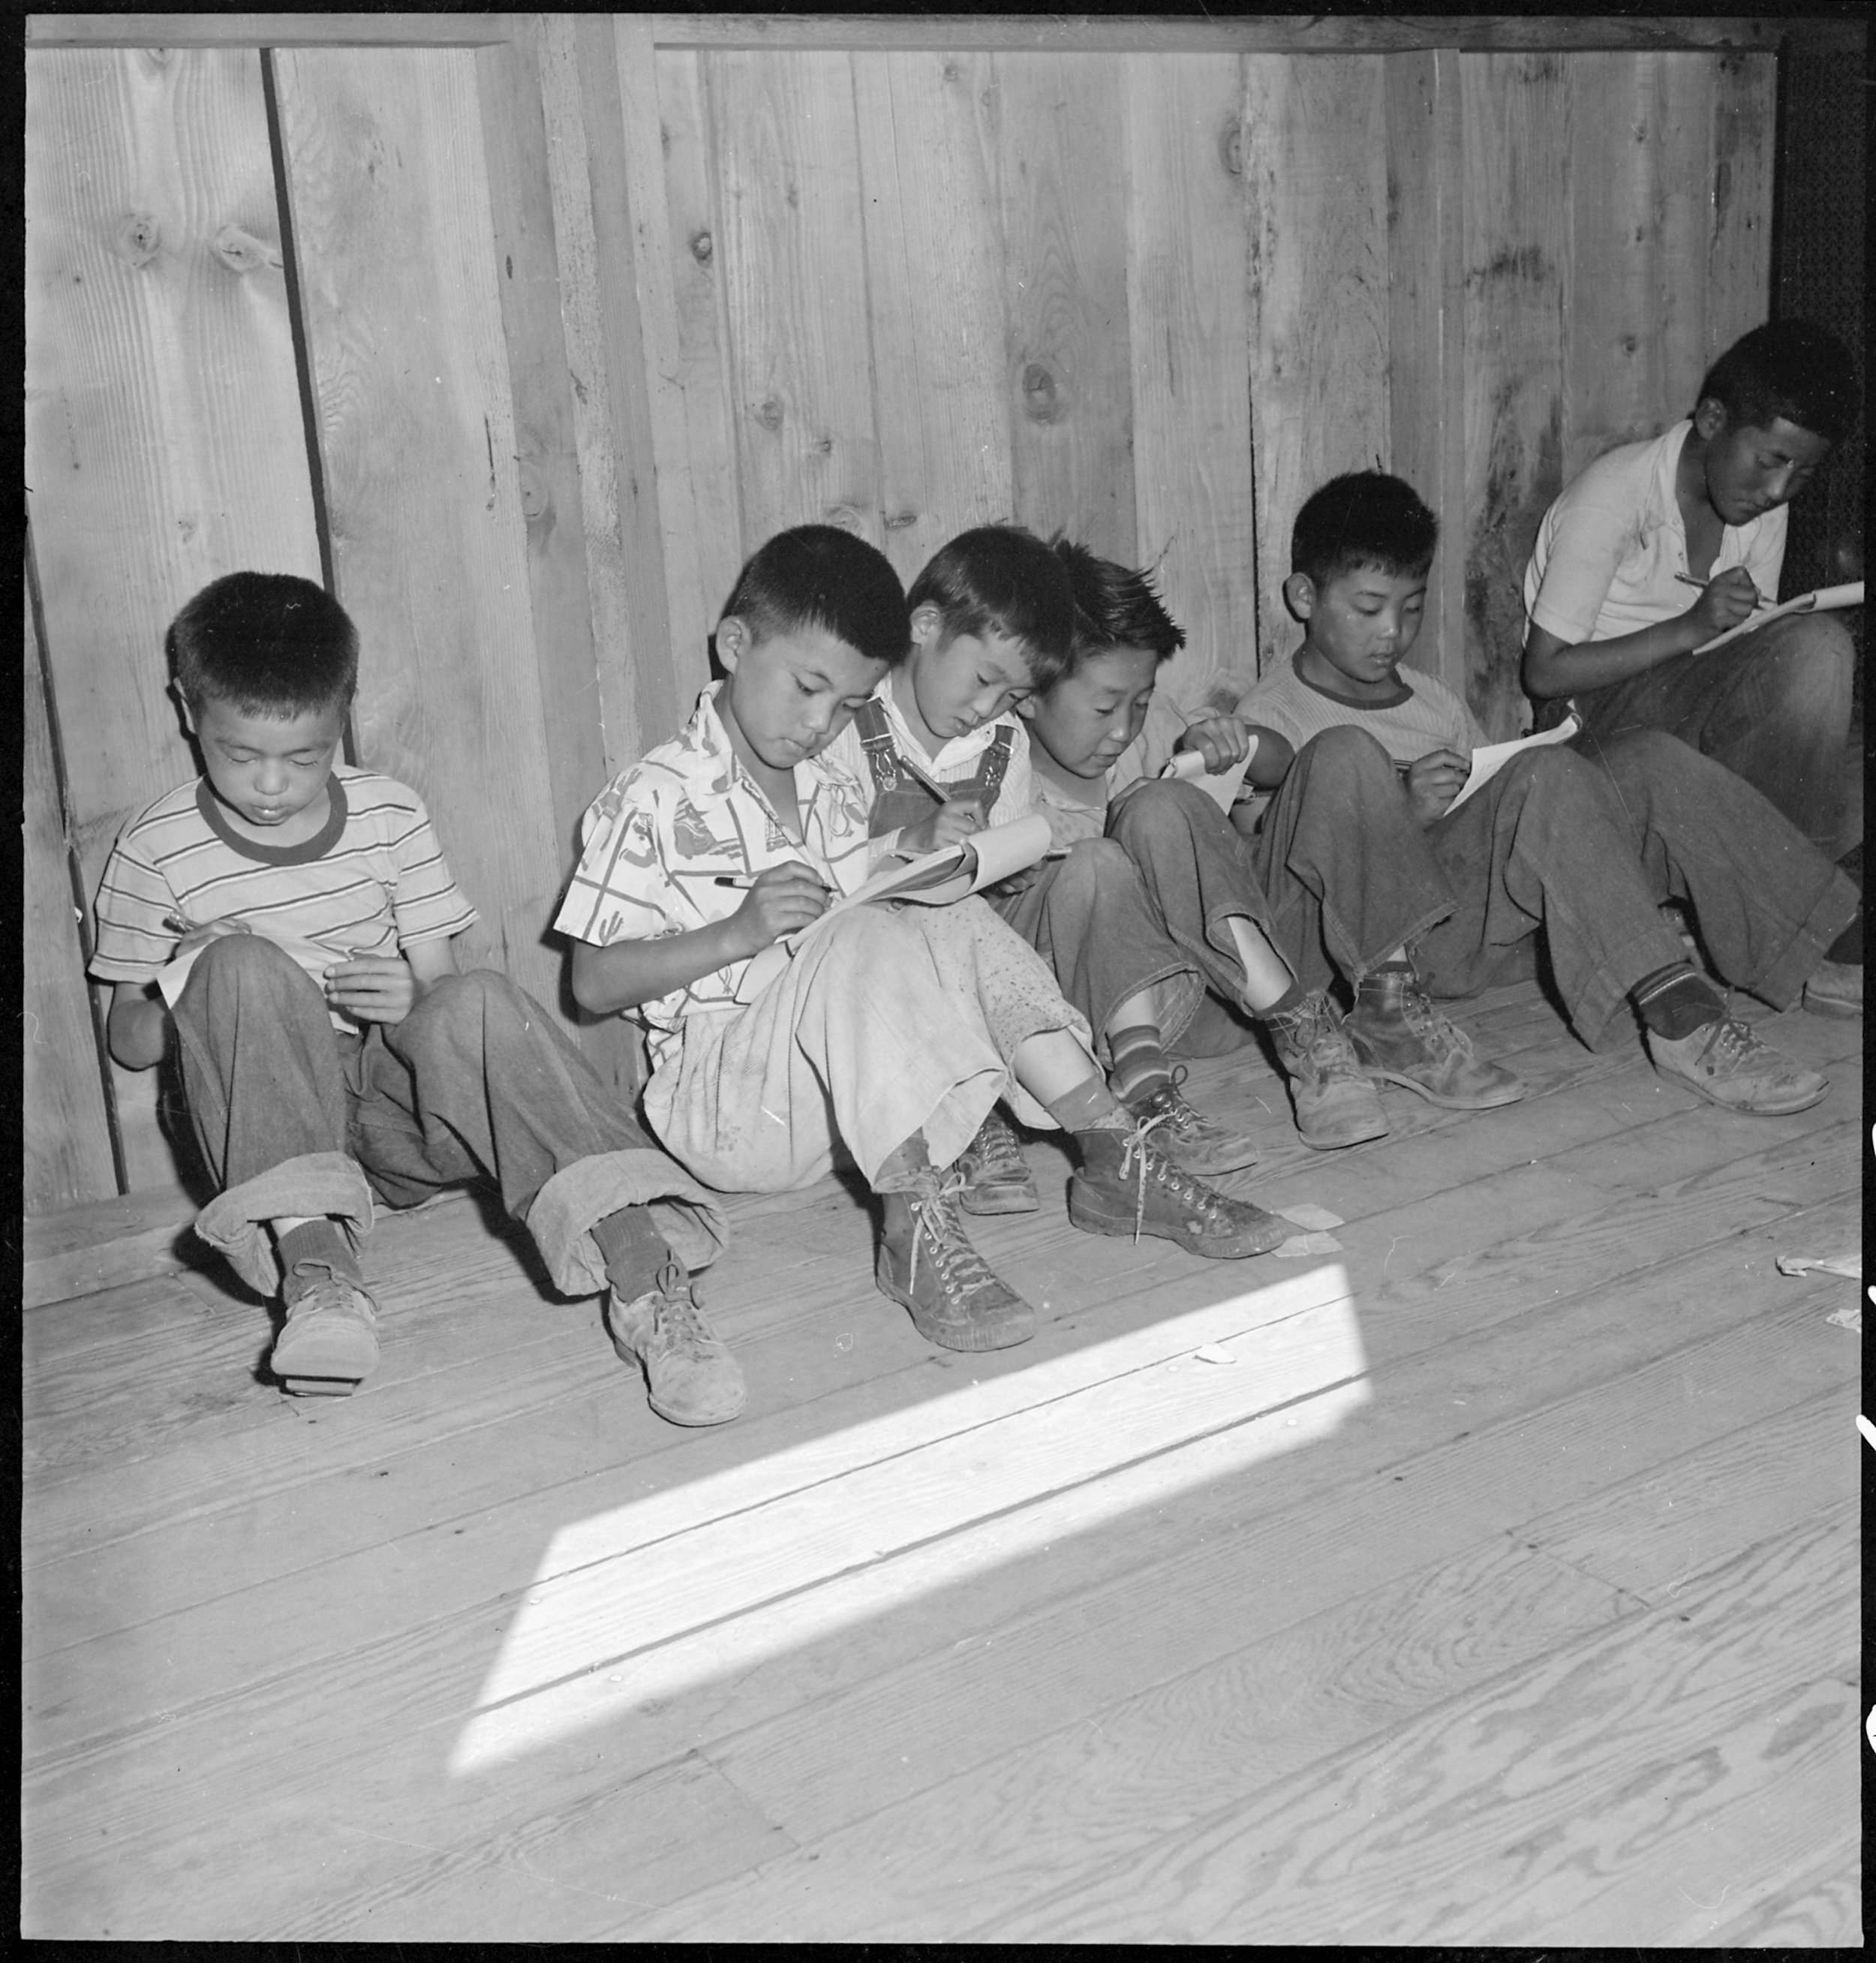  Manzanar Relocation Center, Manzanar, California. An elementary school with voluntary attendance has been established with volunteer teachers, most of whom are college graduates. These young evacuees are eager to learn and do not mind the lack of eq